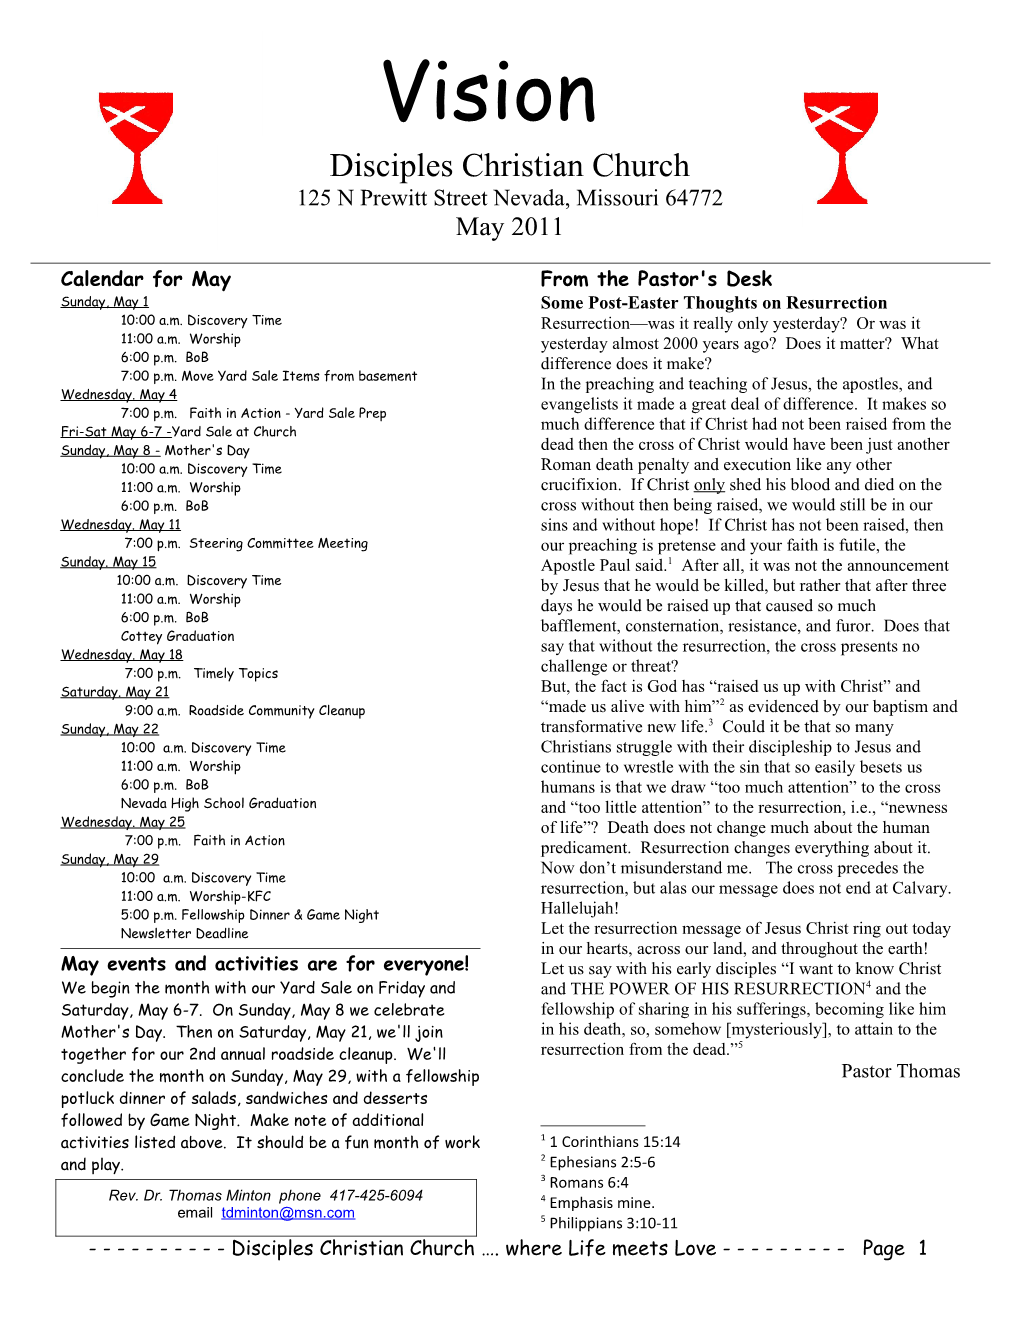 Disciples Christian Church . Where Life Meets Love Page 1